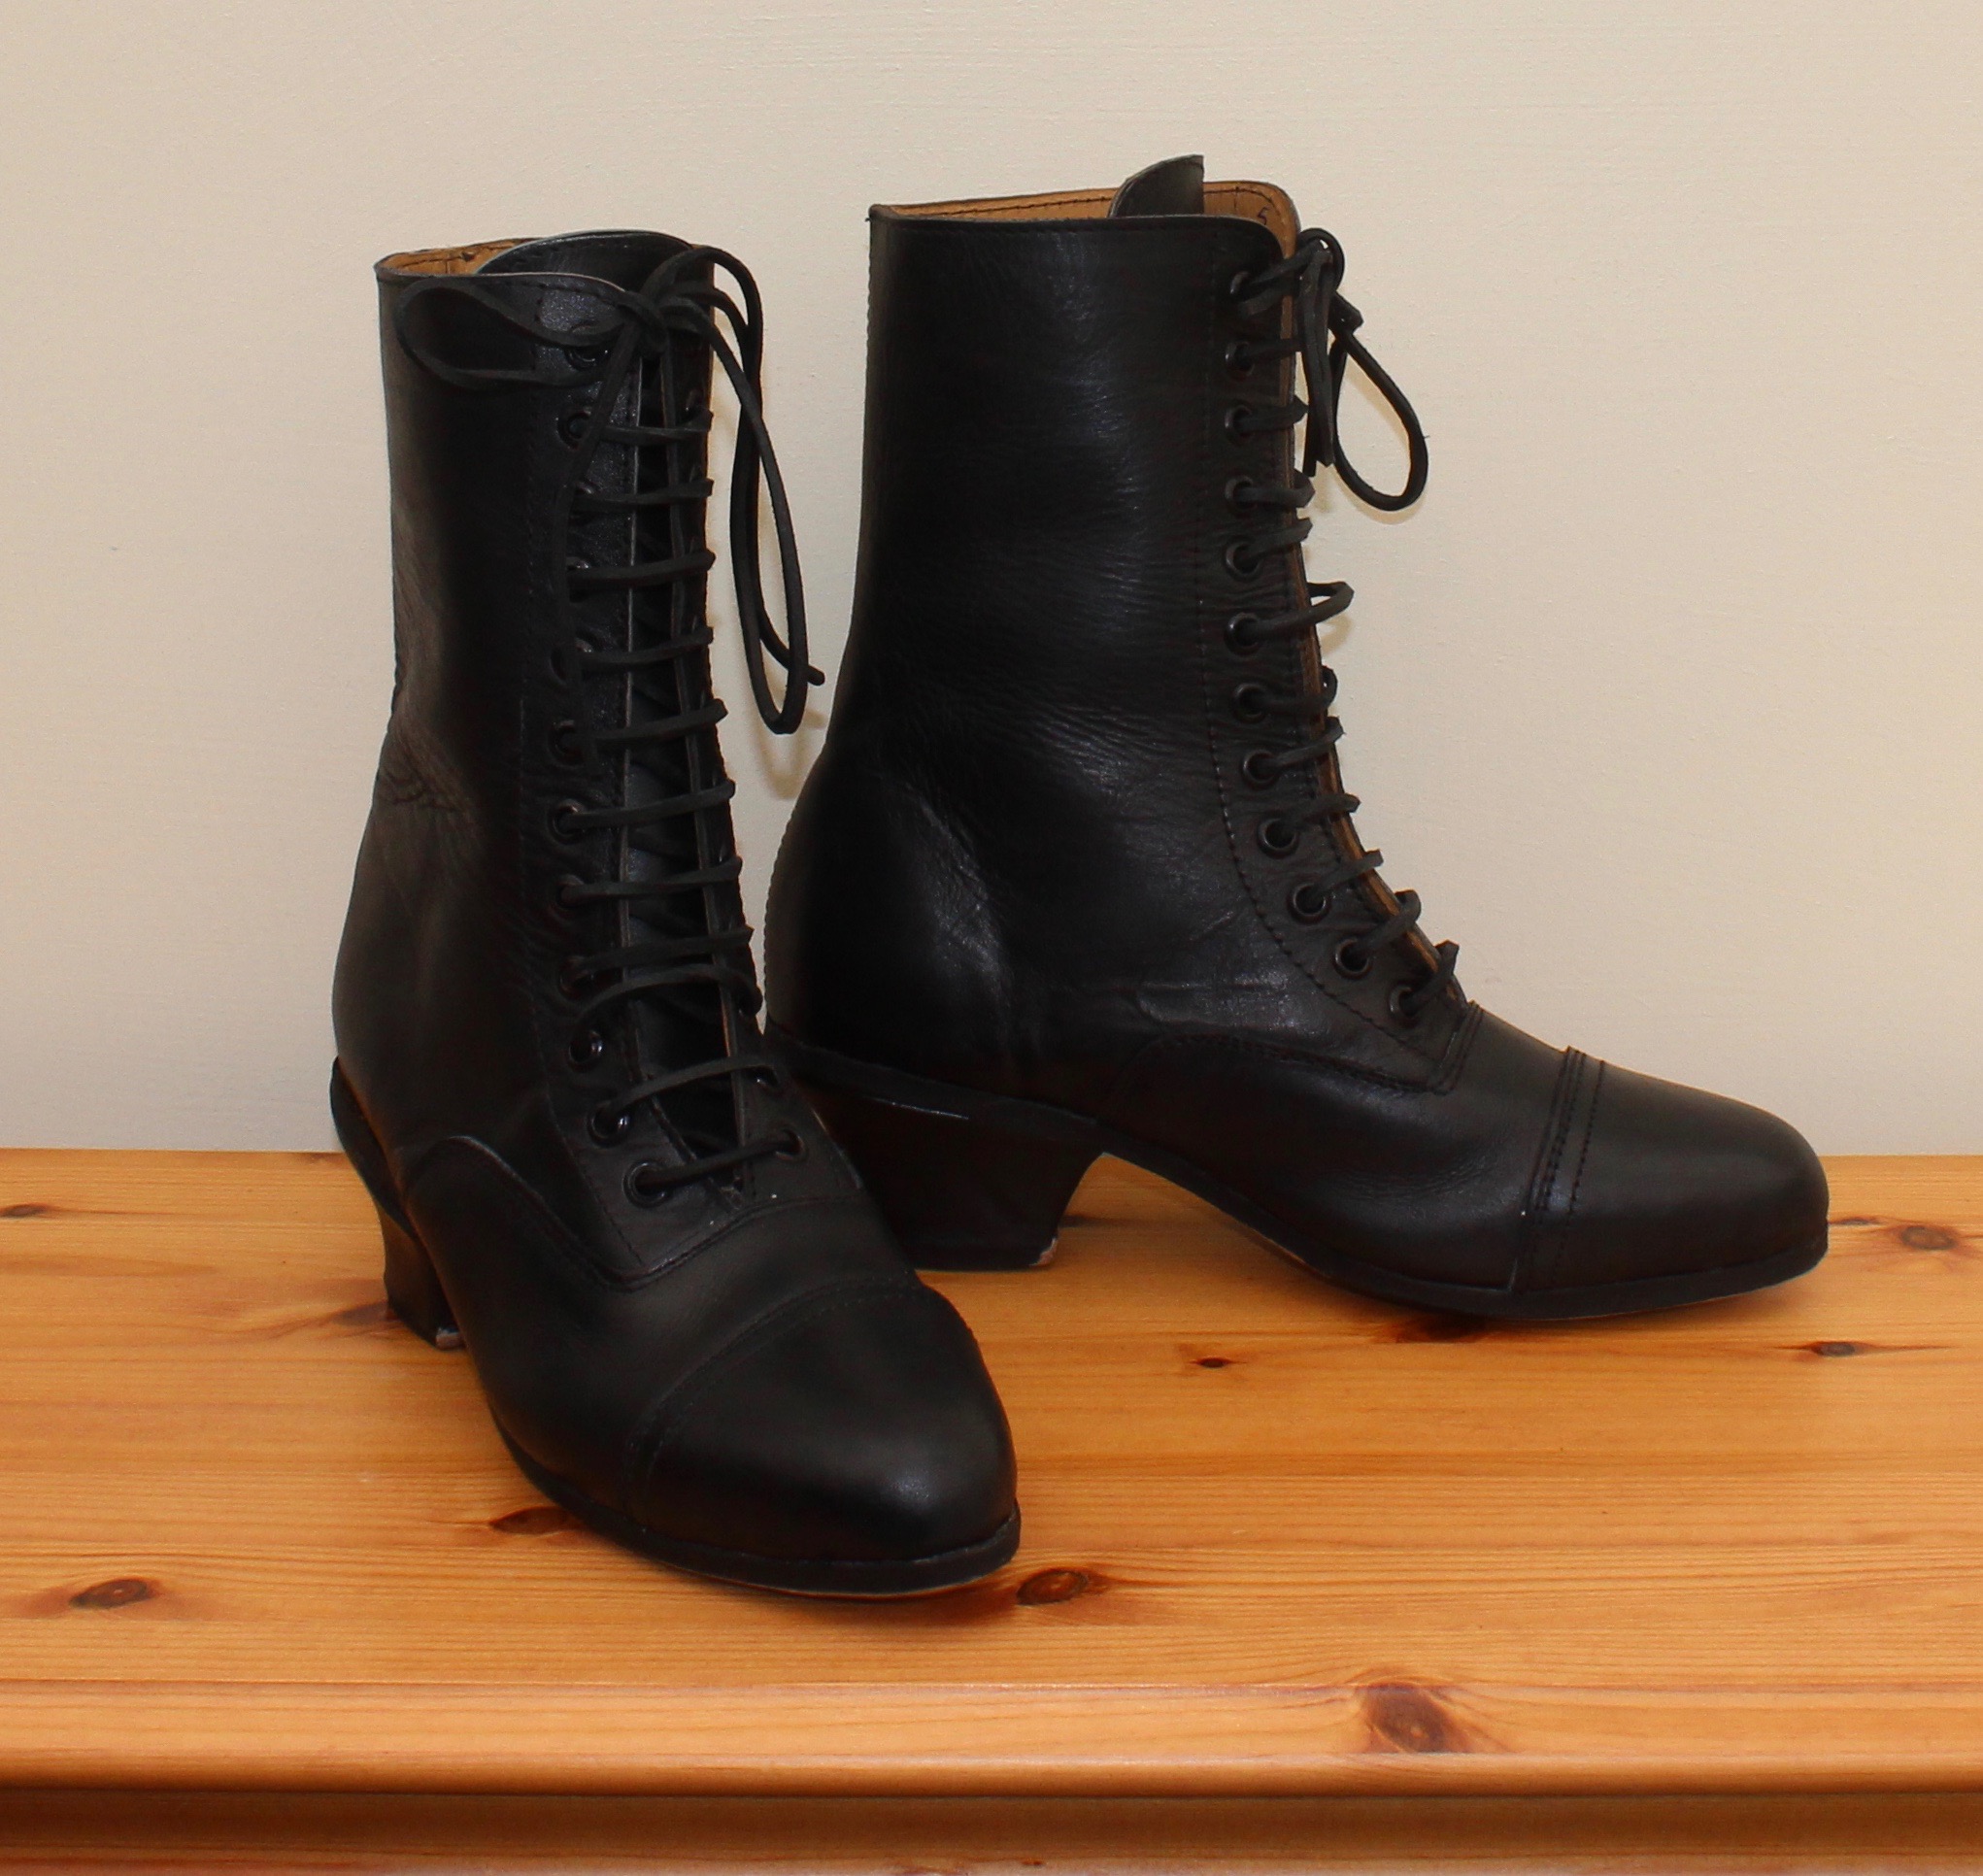 leather long boots sale